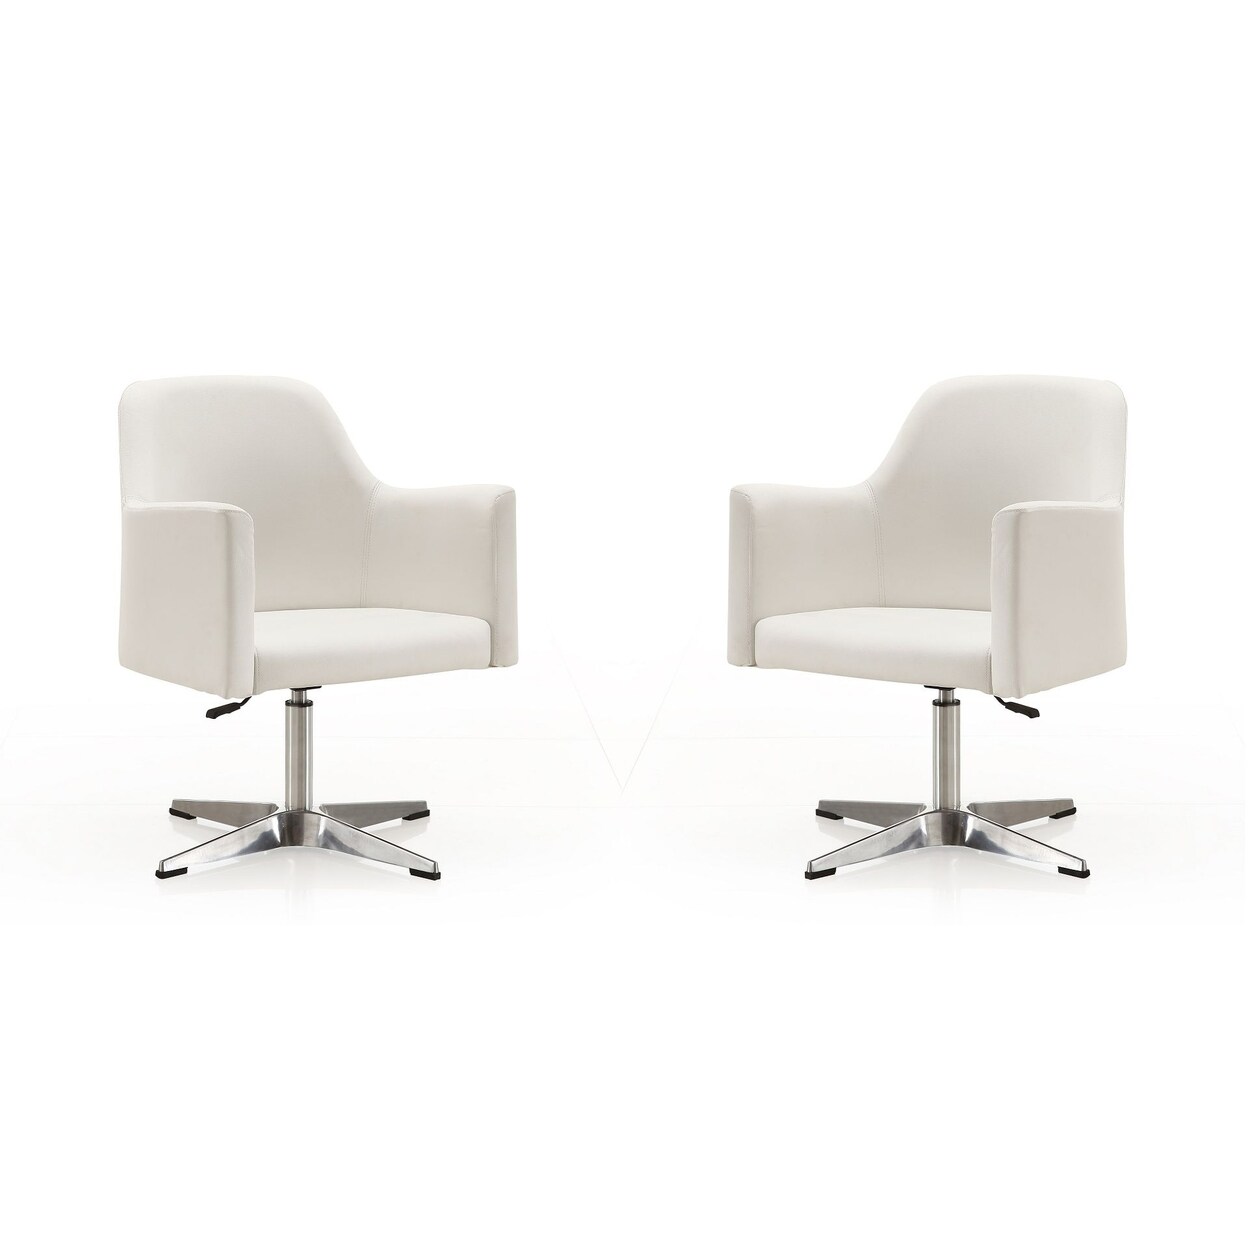 Manhattan Comfort Pelo White and Polished Chrome Faux Leather Adjustable Height Swivel Accent Chair (Set of 2)